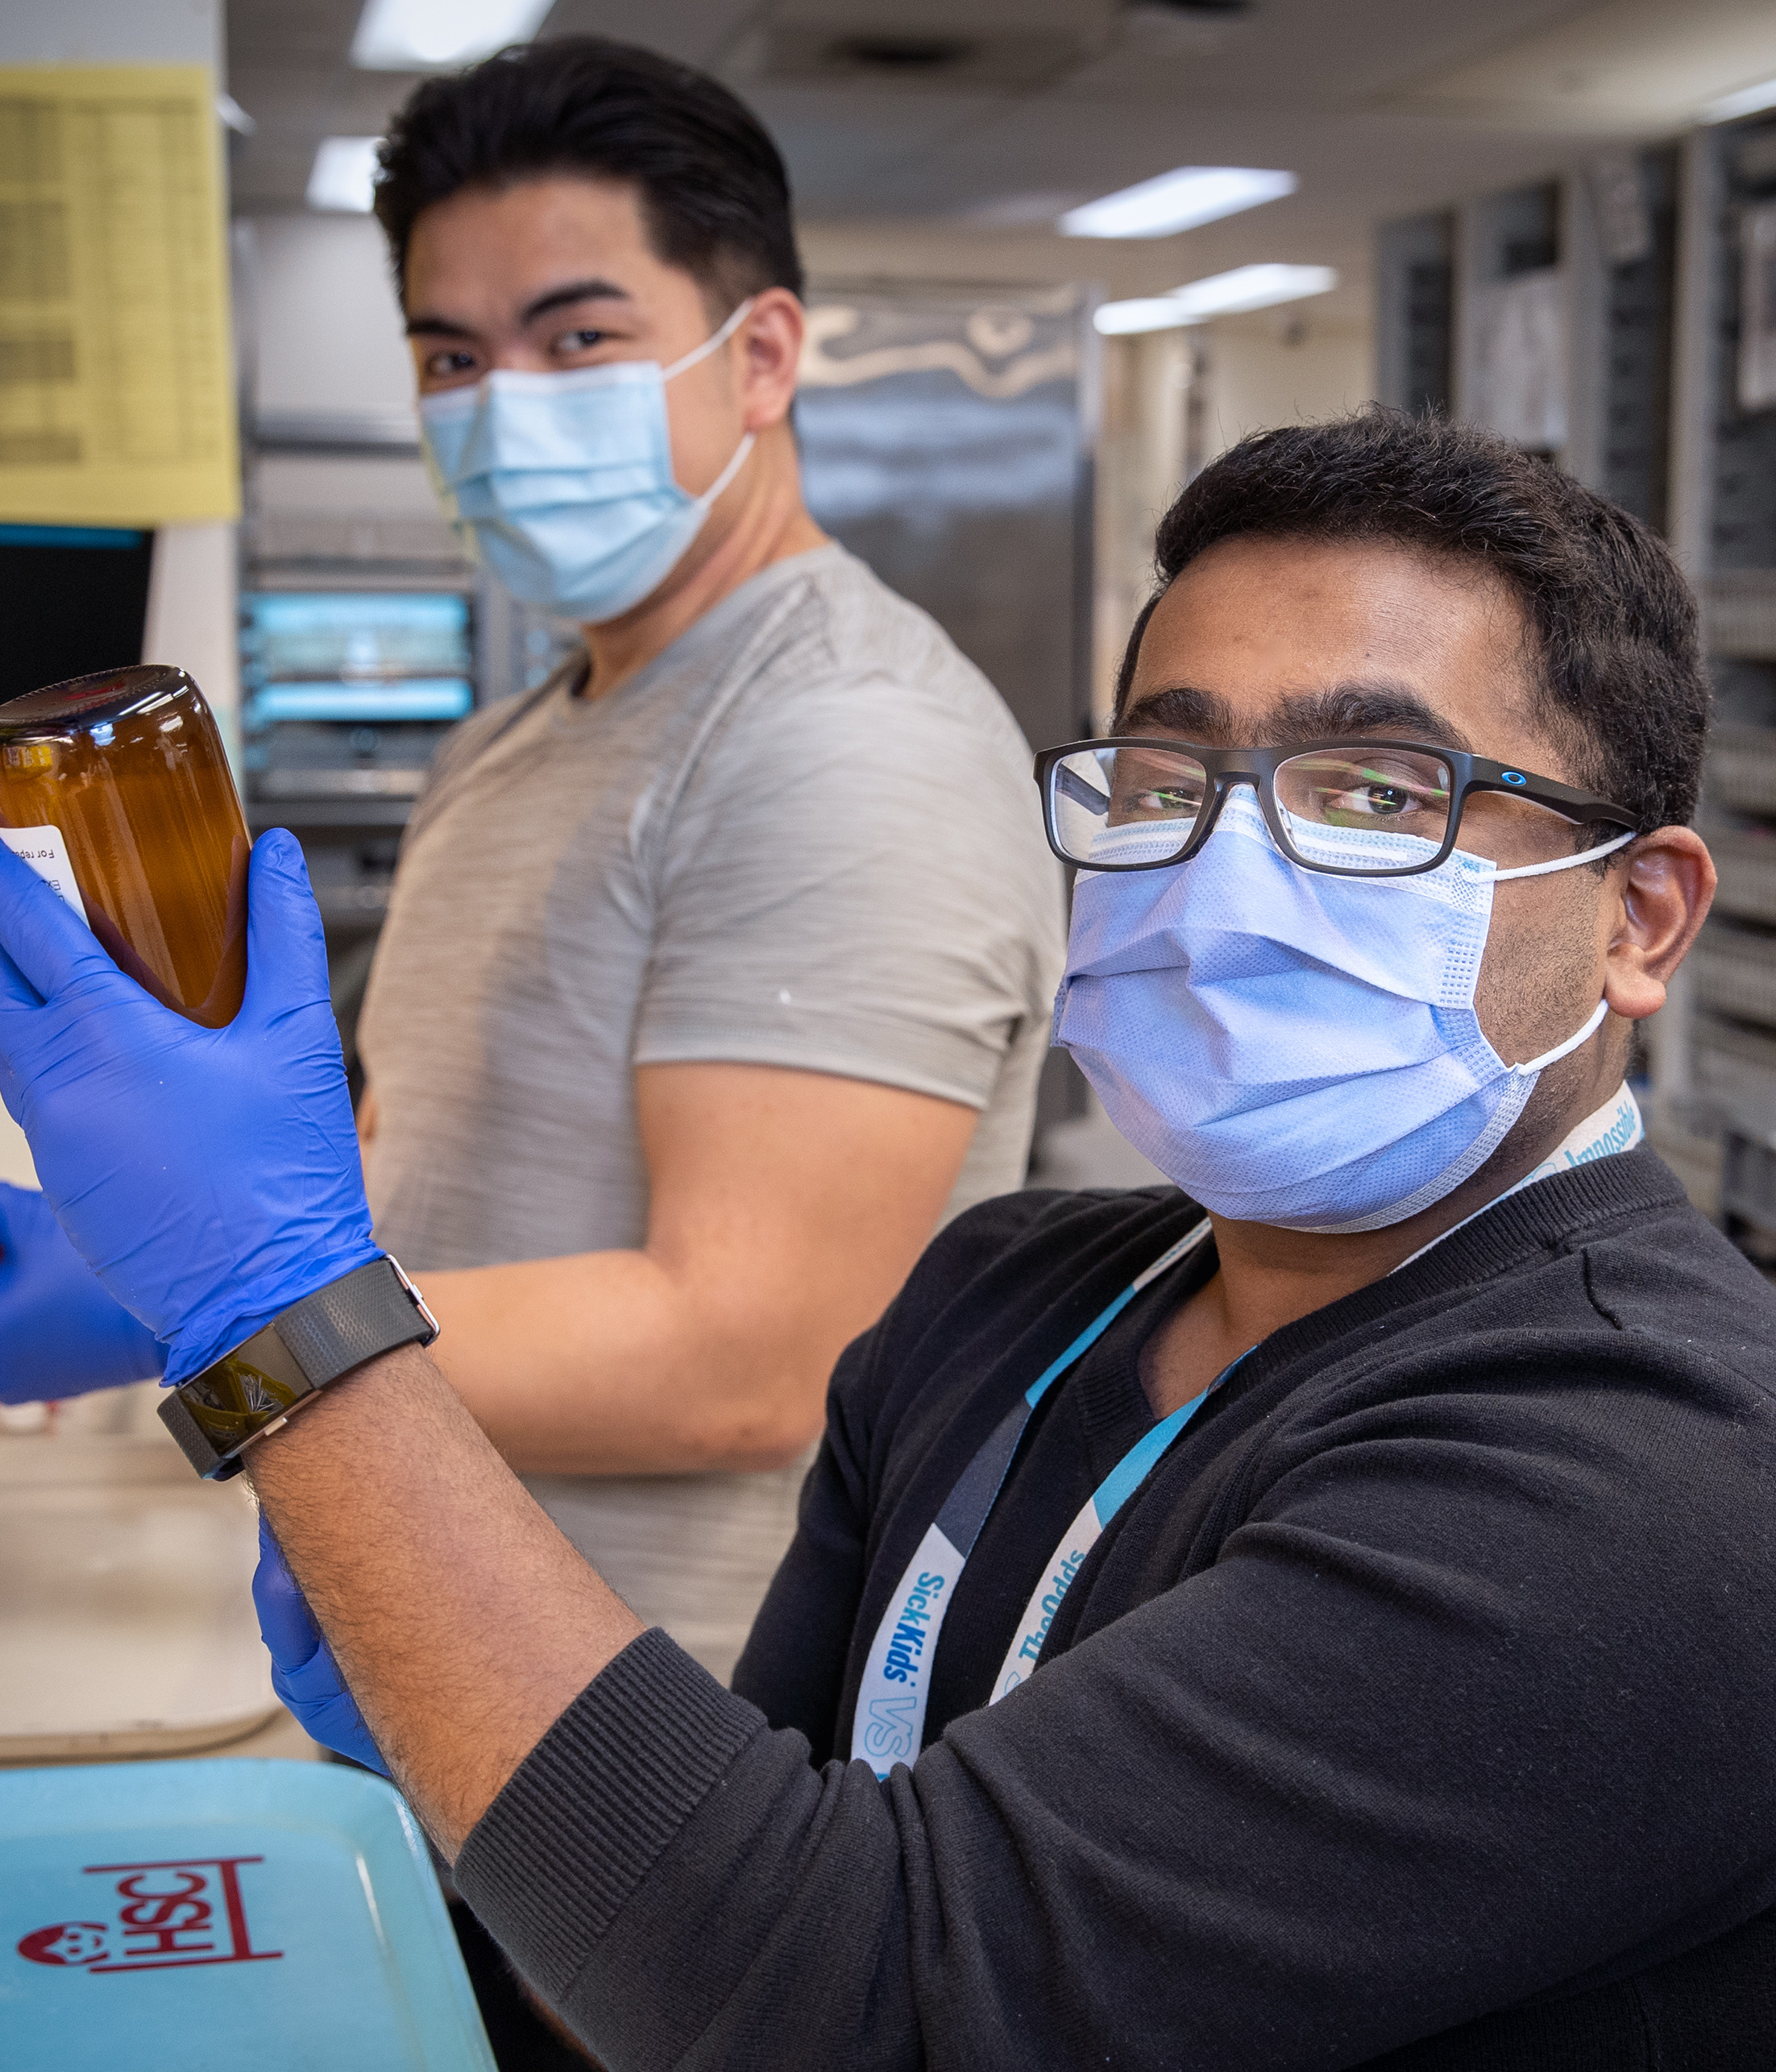 Two members of the SickKids pharmacy team are shown in a lab, with one individual holding up an item to the camera.